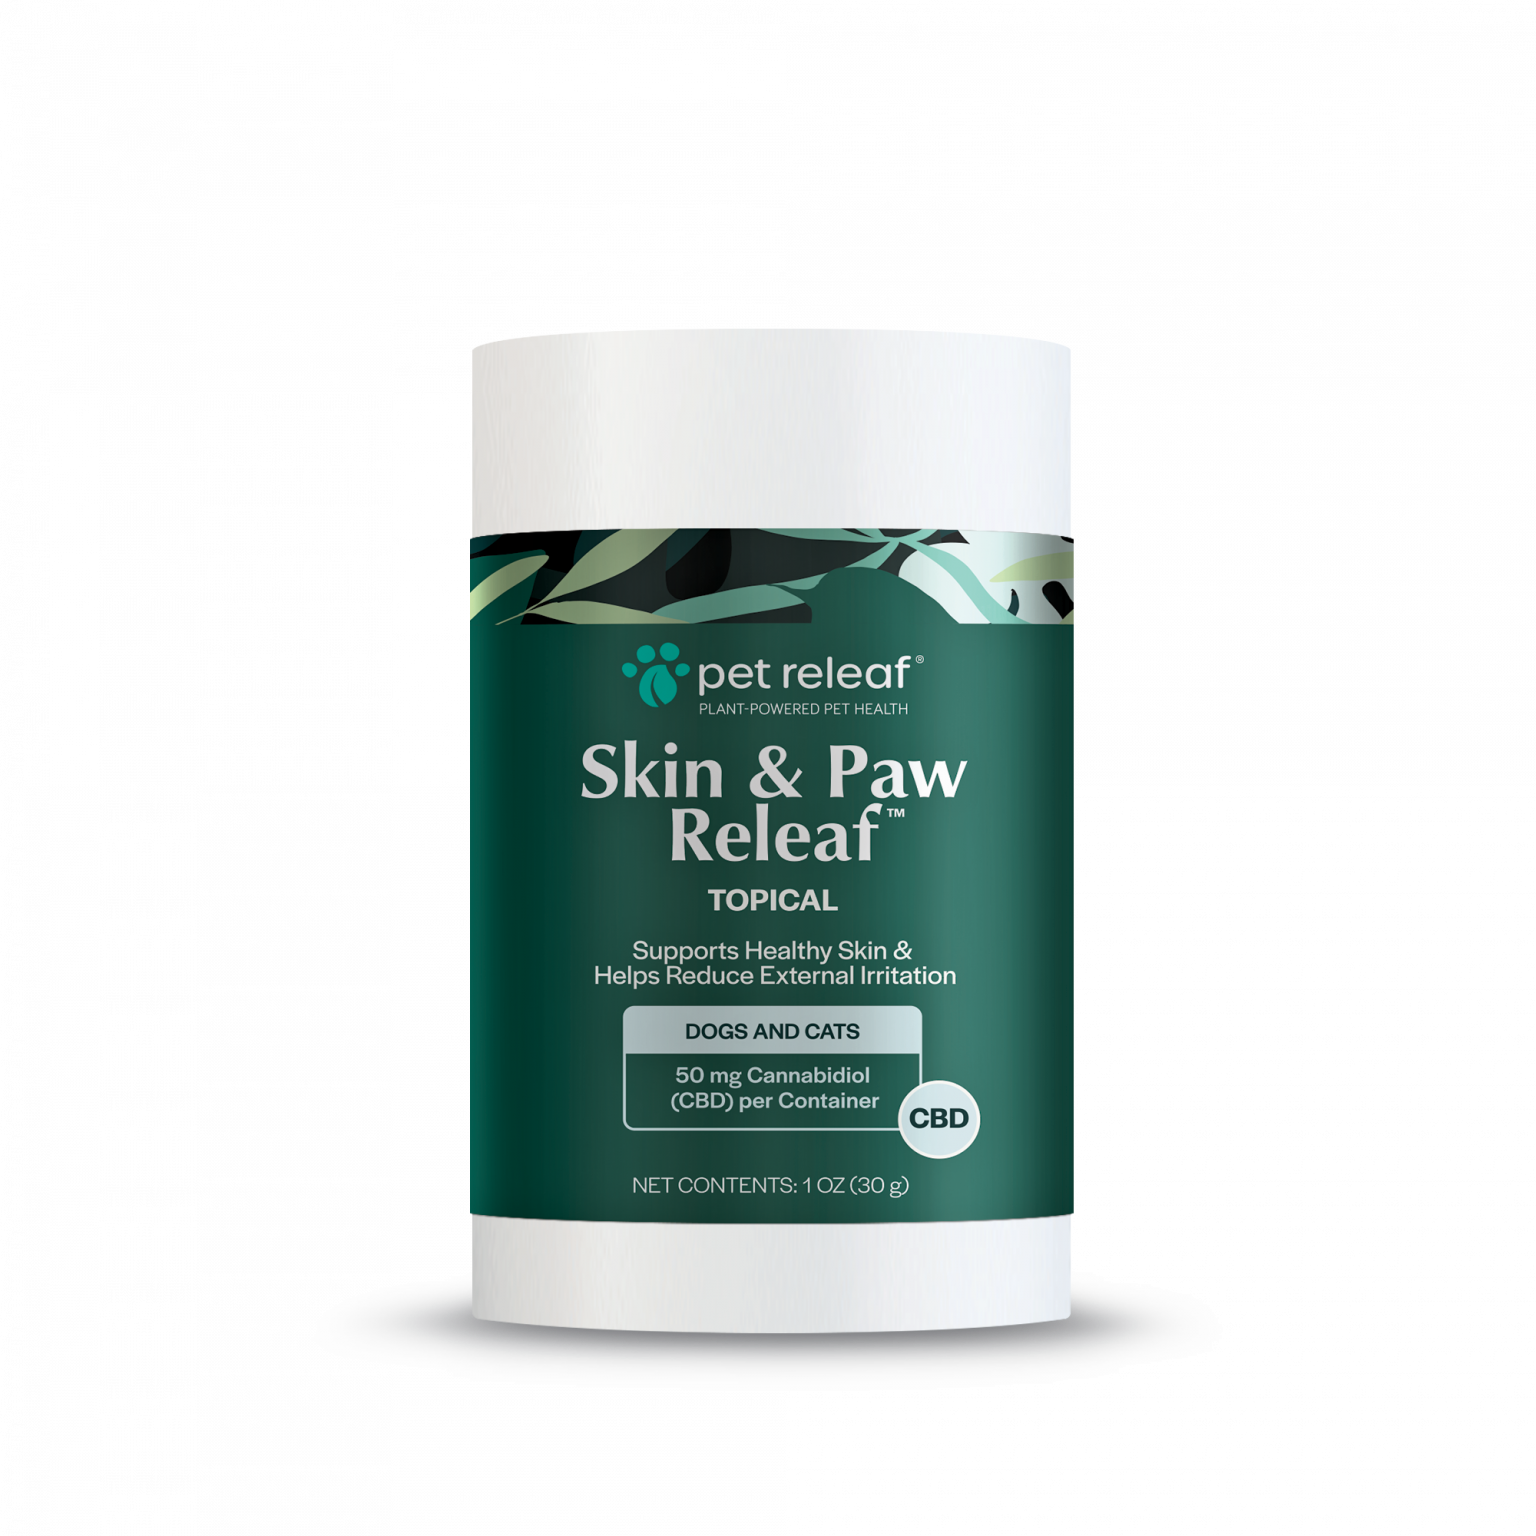 Skin & Paw Relief Topical